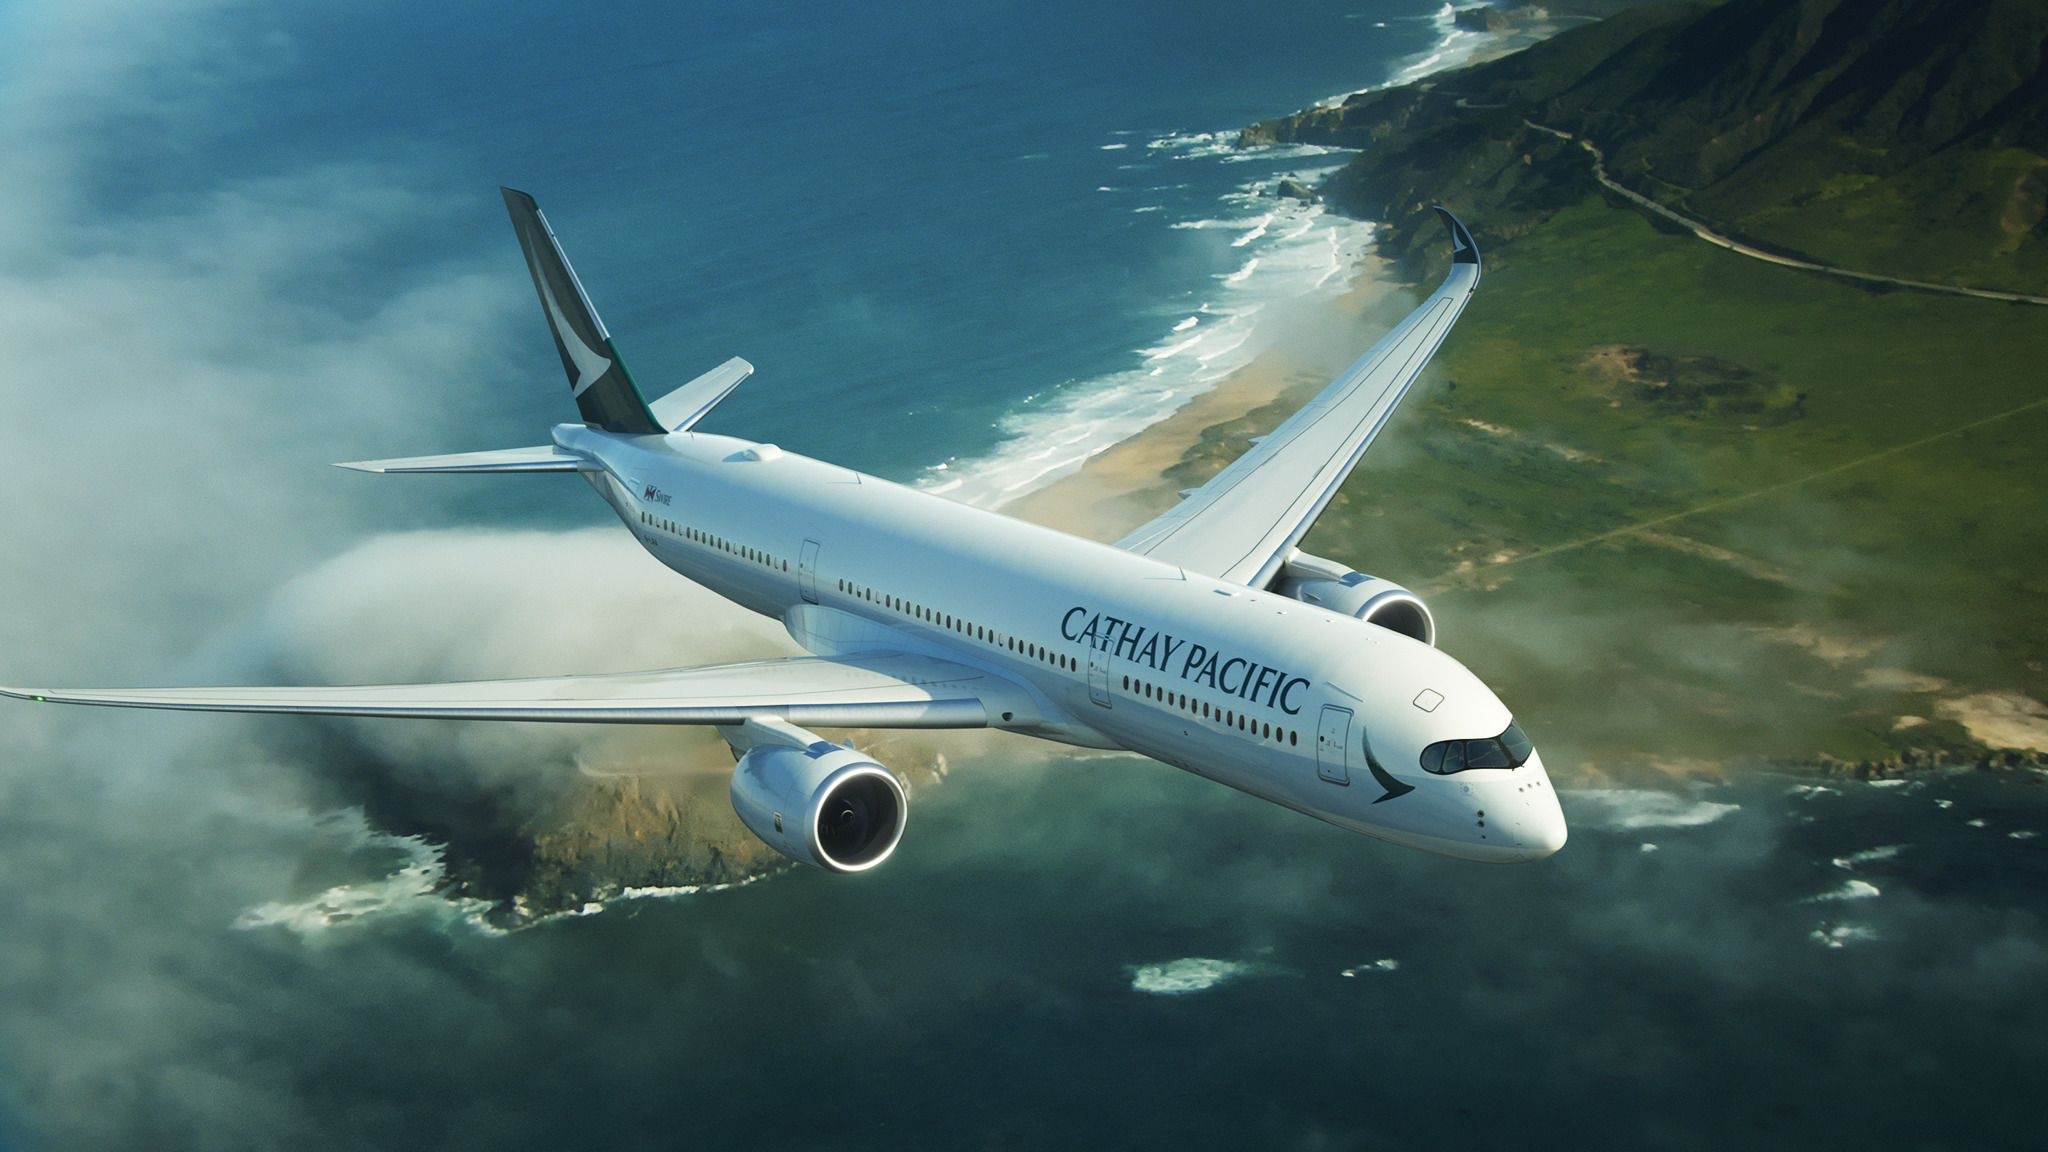 Cathay Pacific, Cathay Pacific wallpapers, 2050x1160 HD Desktop